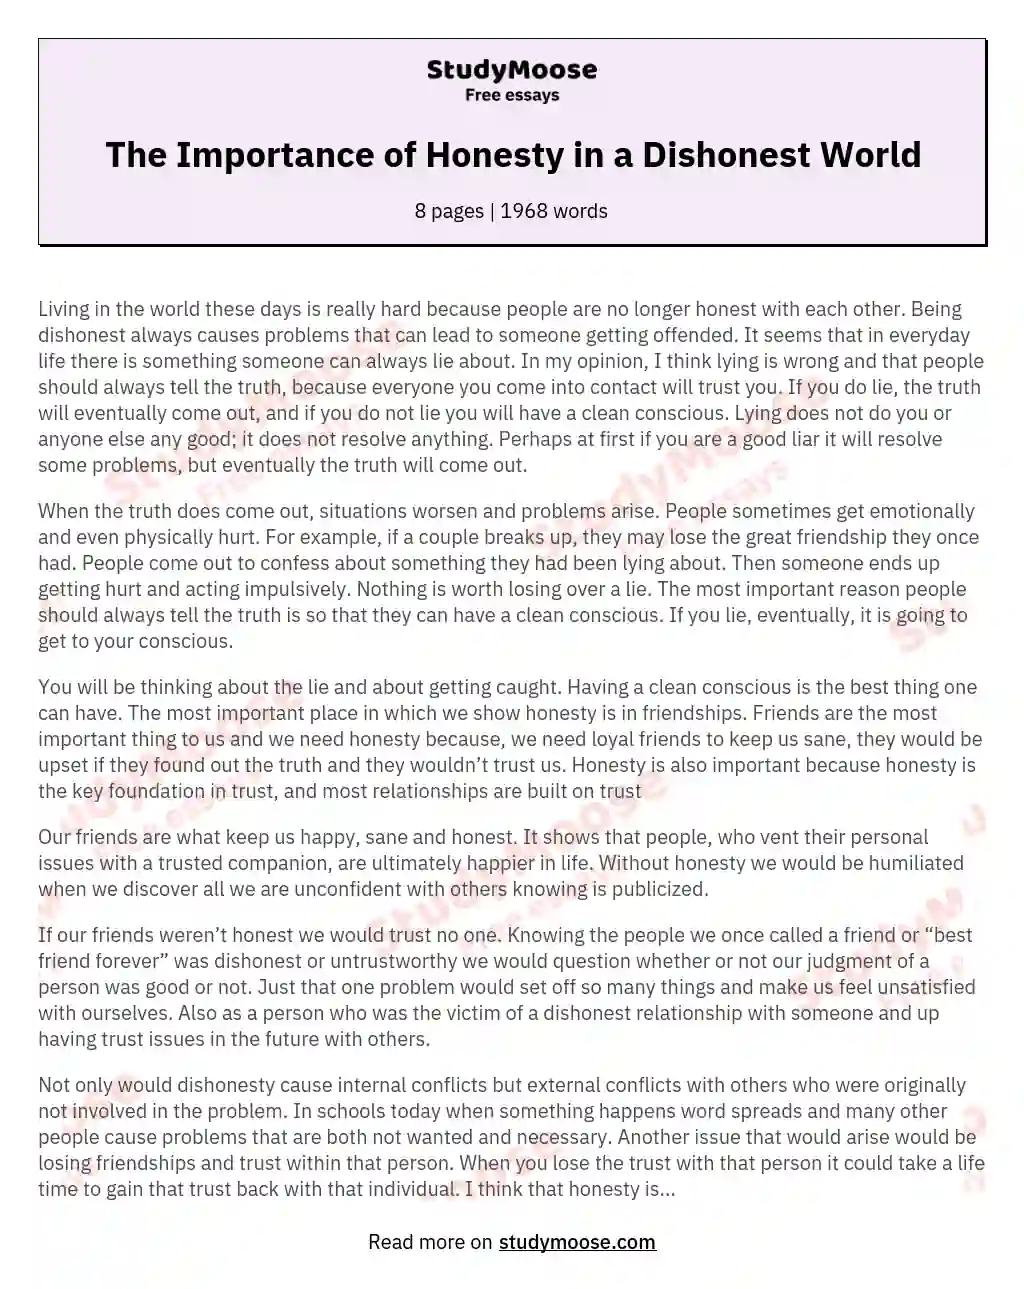 The Importance of Honesty in a Dishonest World essay